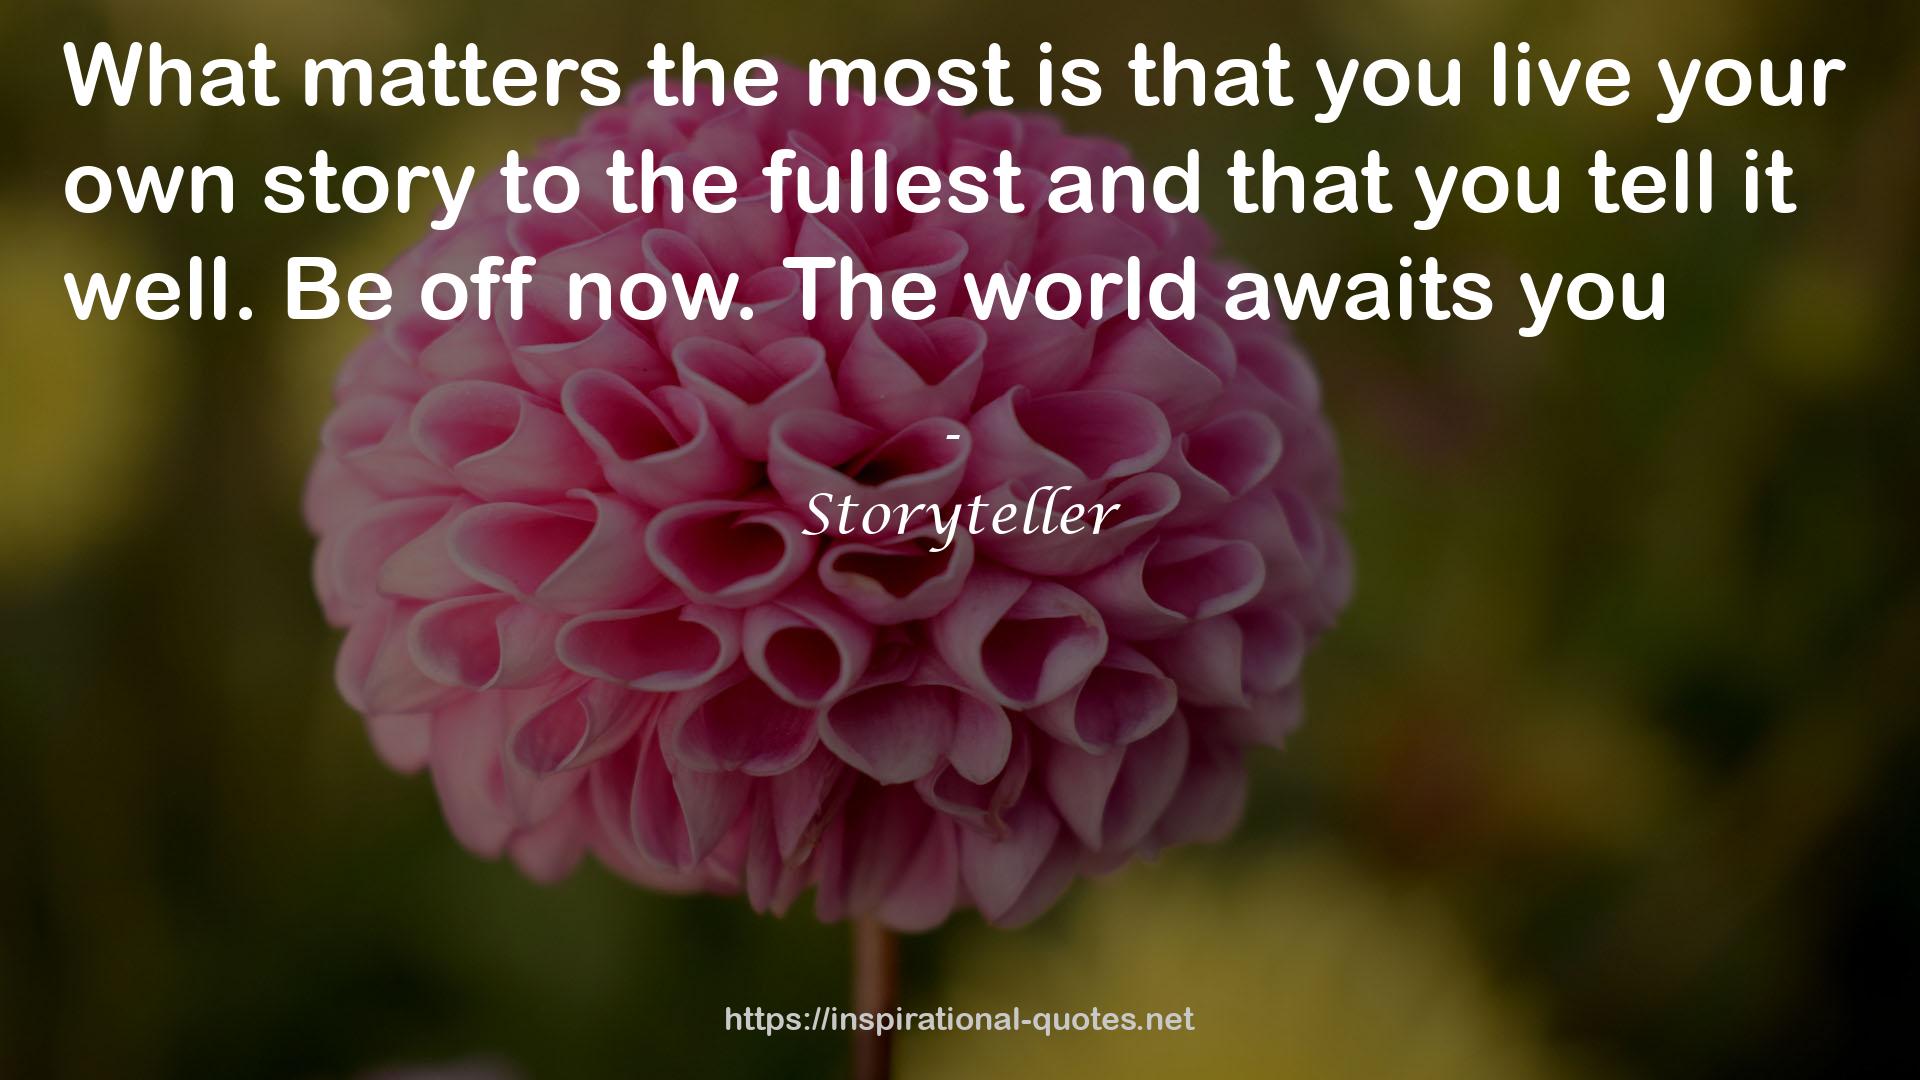 Storyteller QUOTES